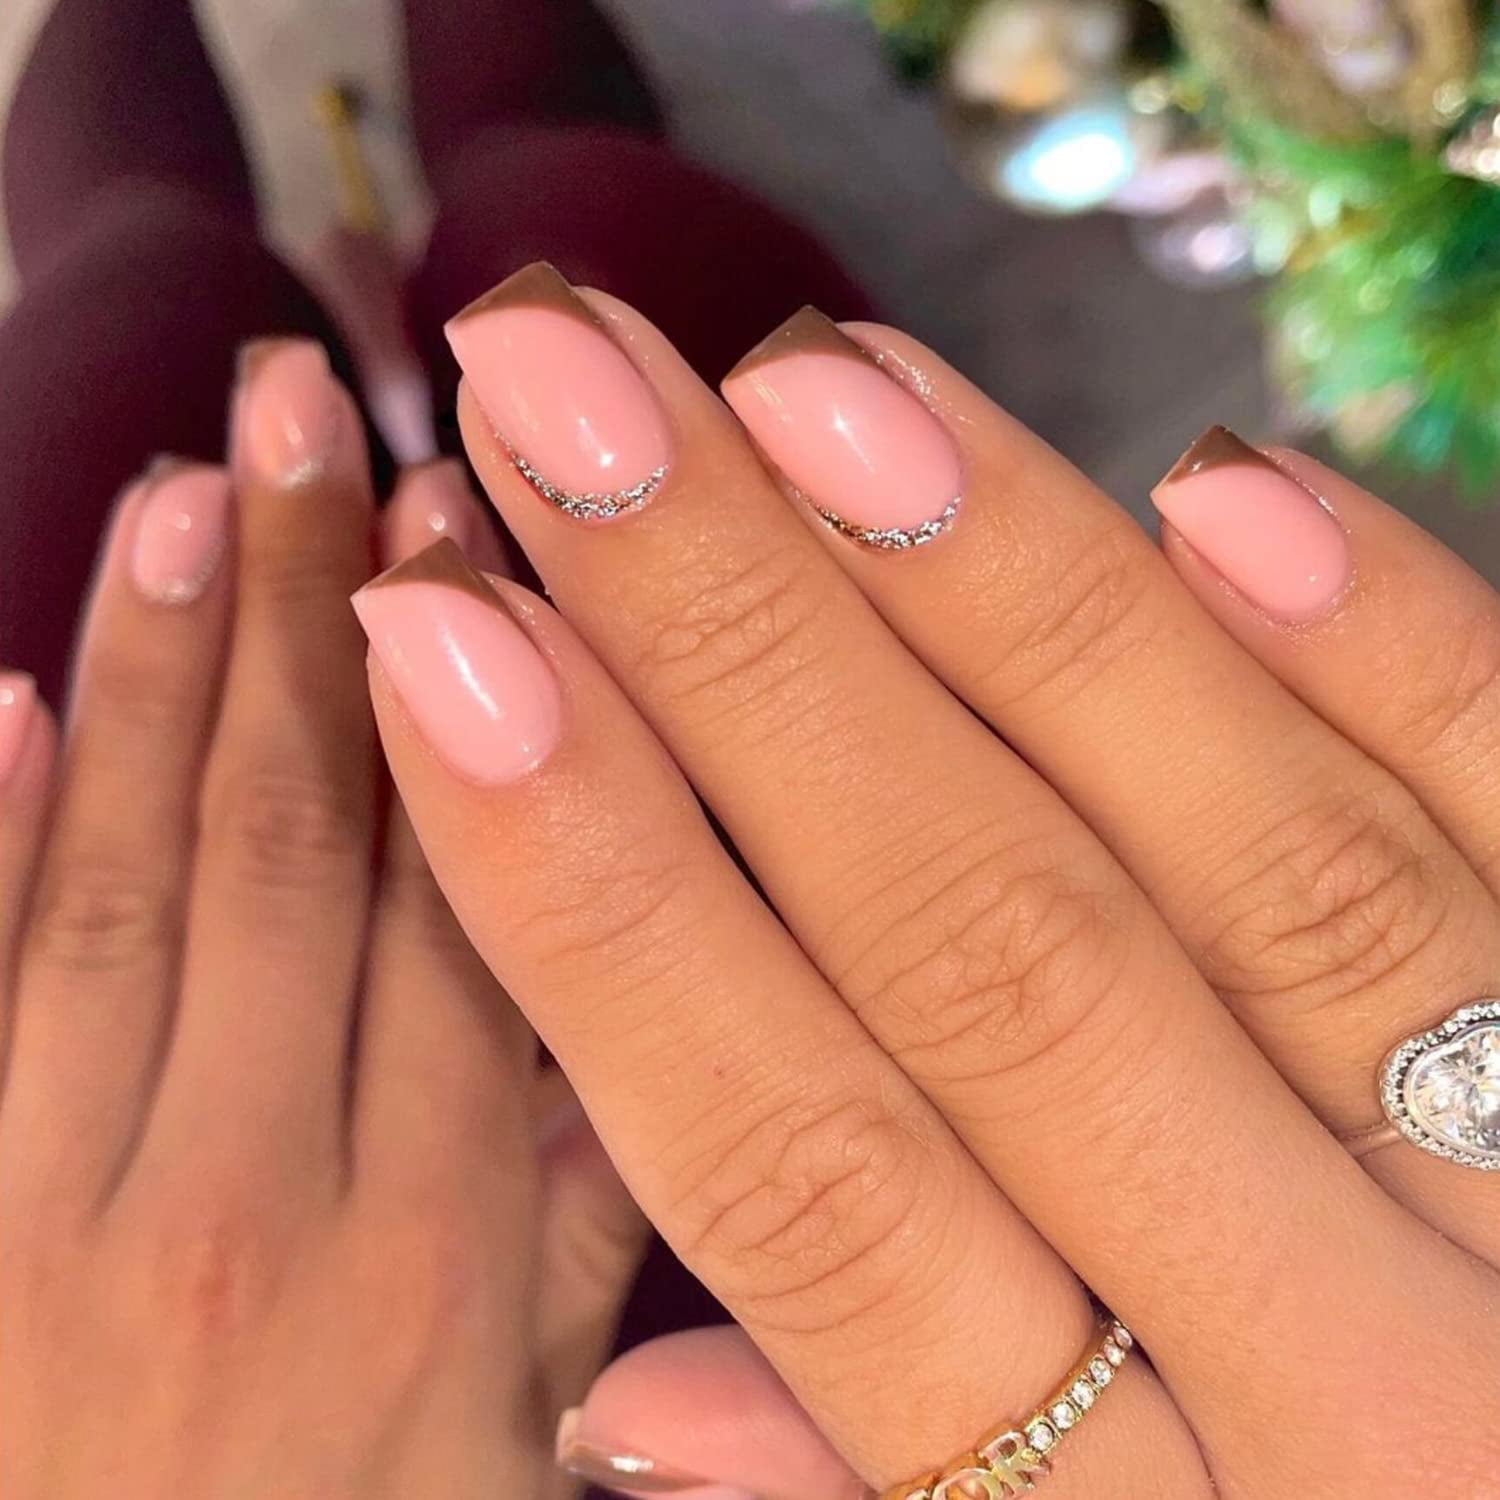 10 Two-Tone French Nail Ideas That Put a Colorful Spin on the Minimalist  Mani